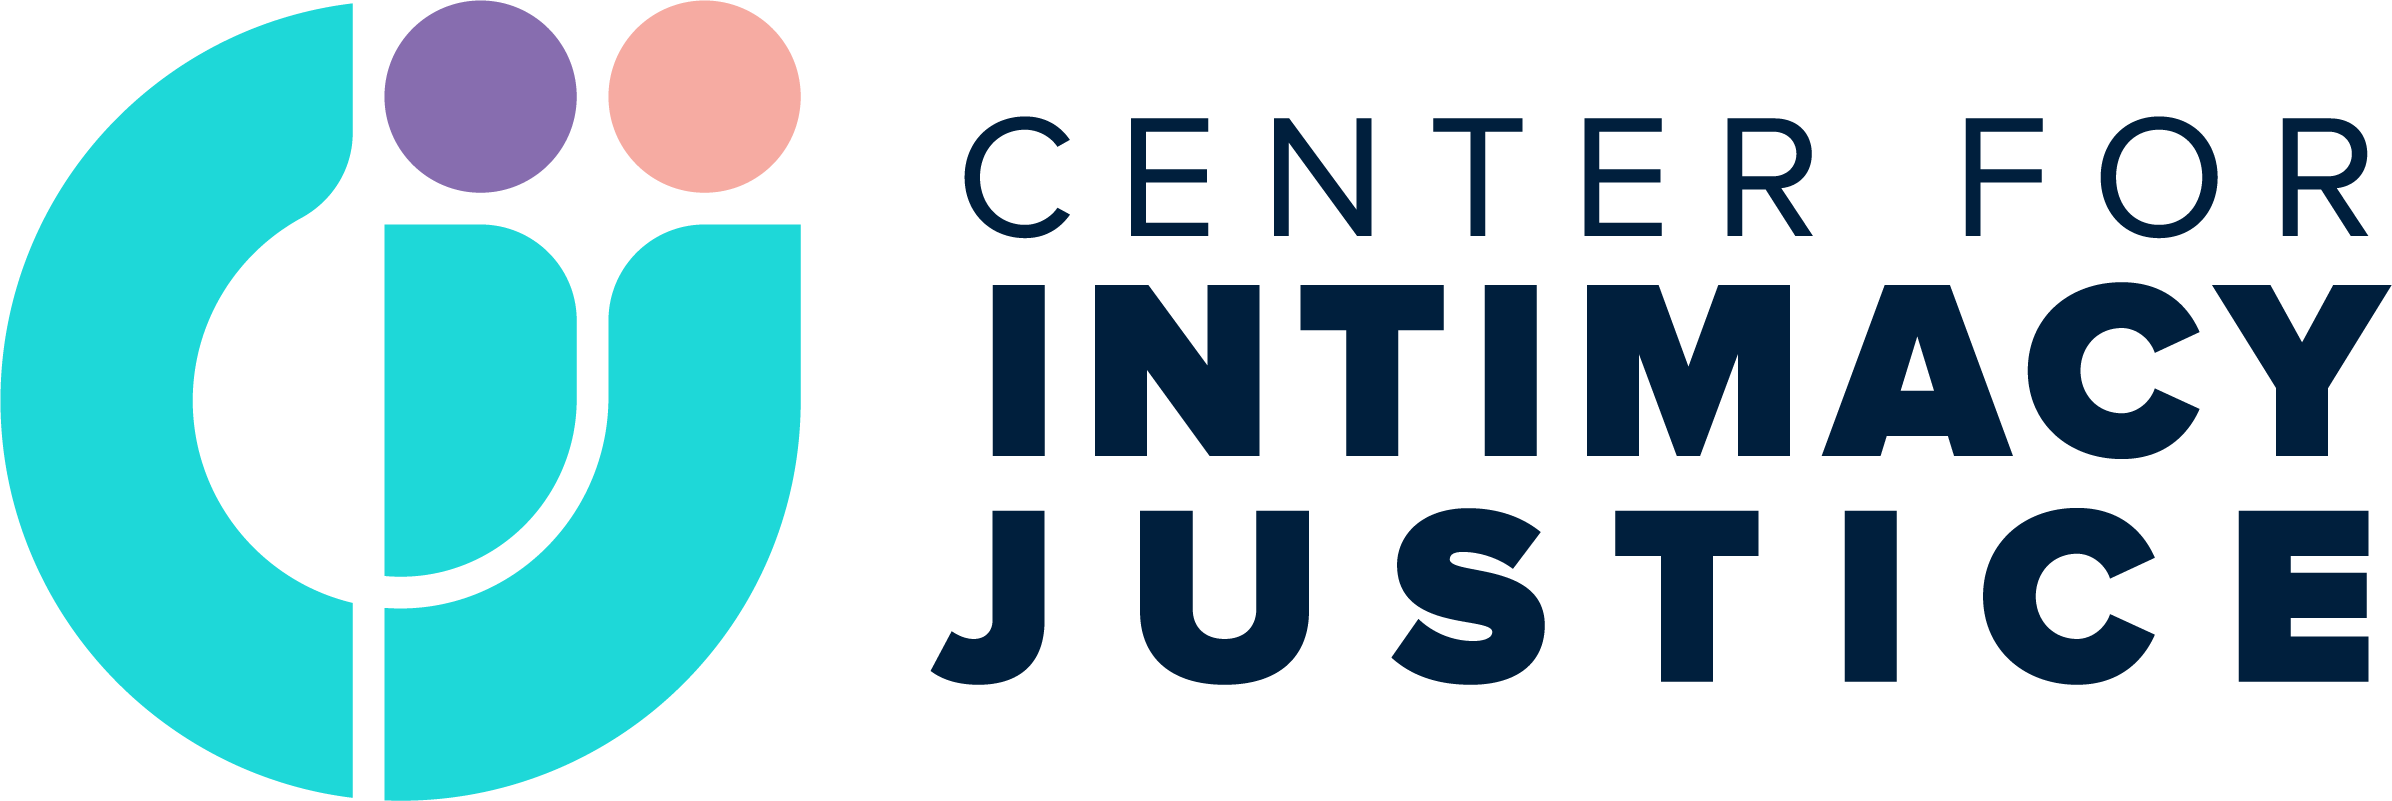 Center for Intimacy Justice